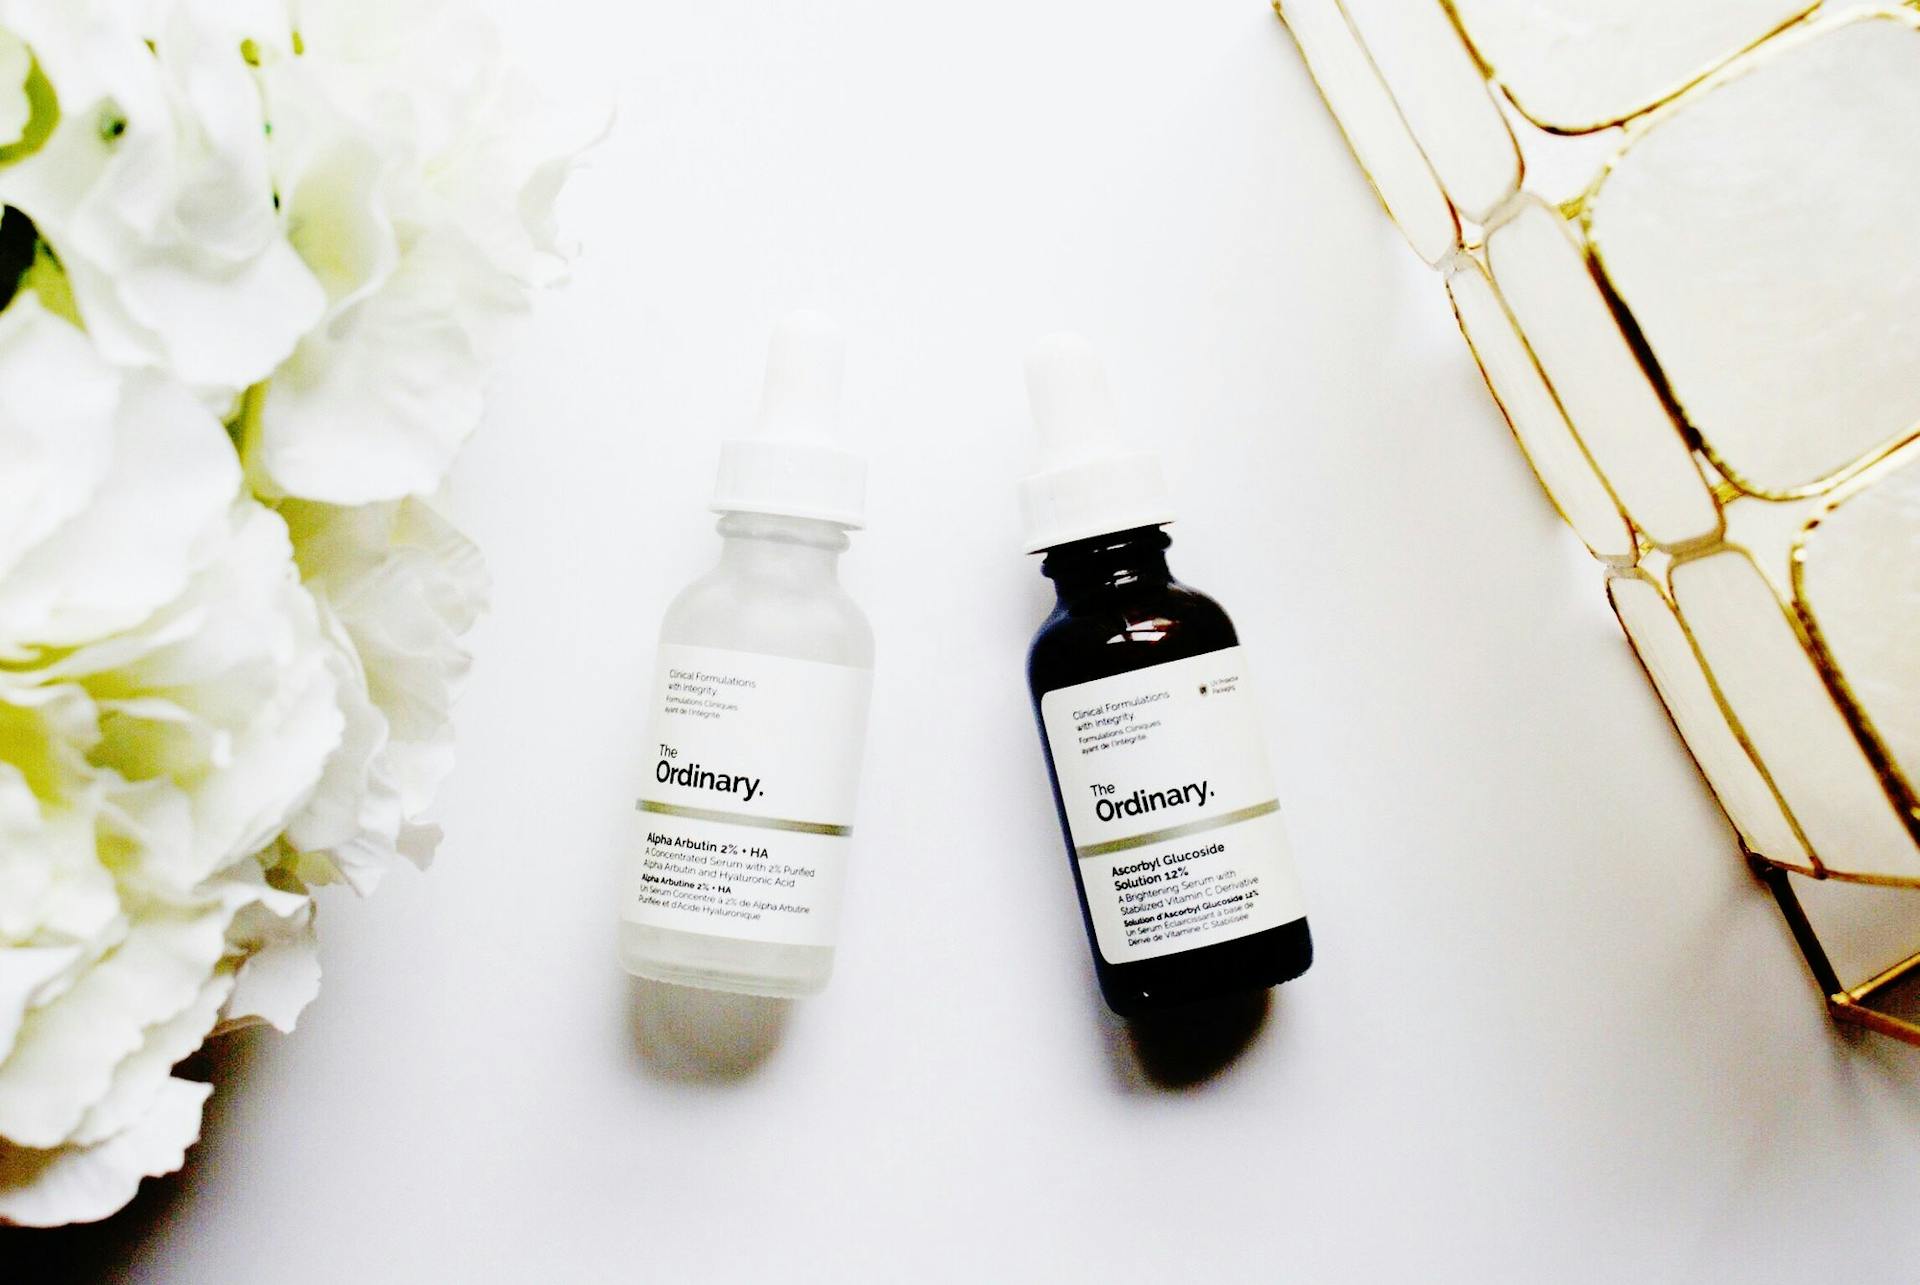 Does The Ordinary Skincare Really Work?